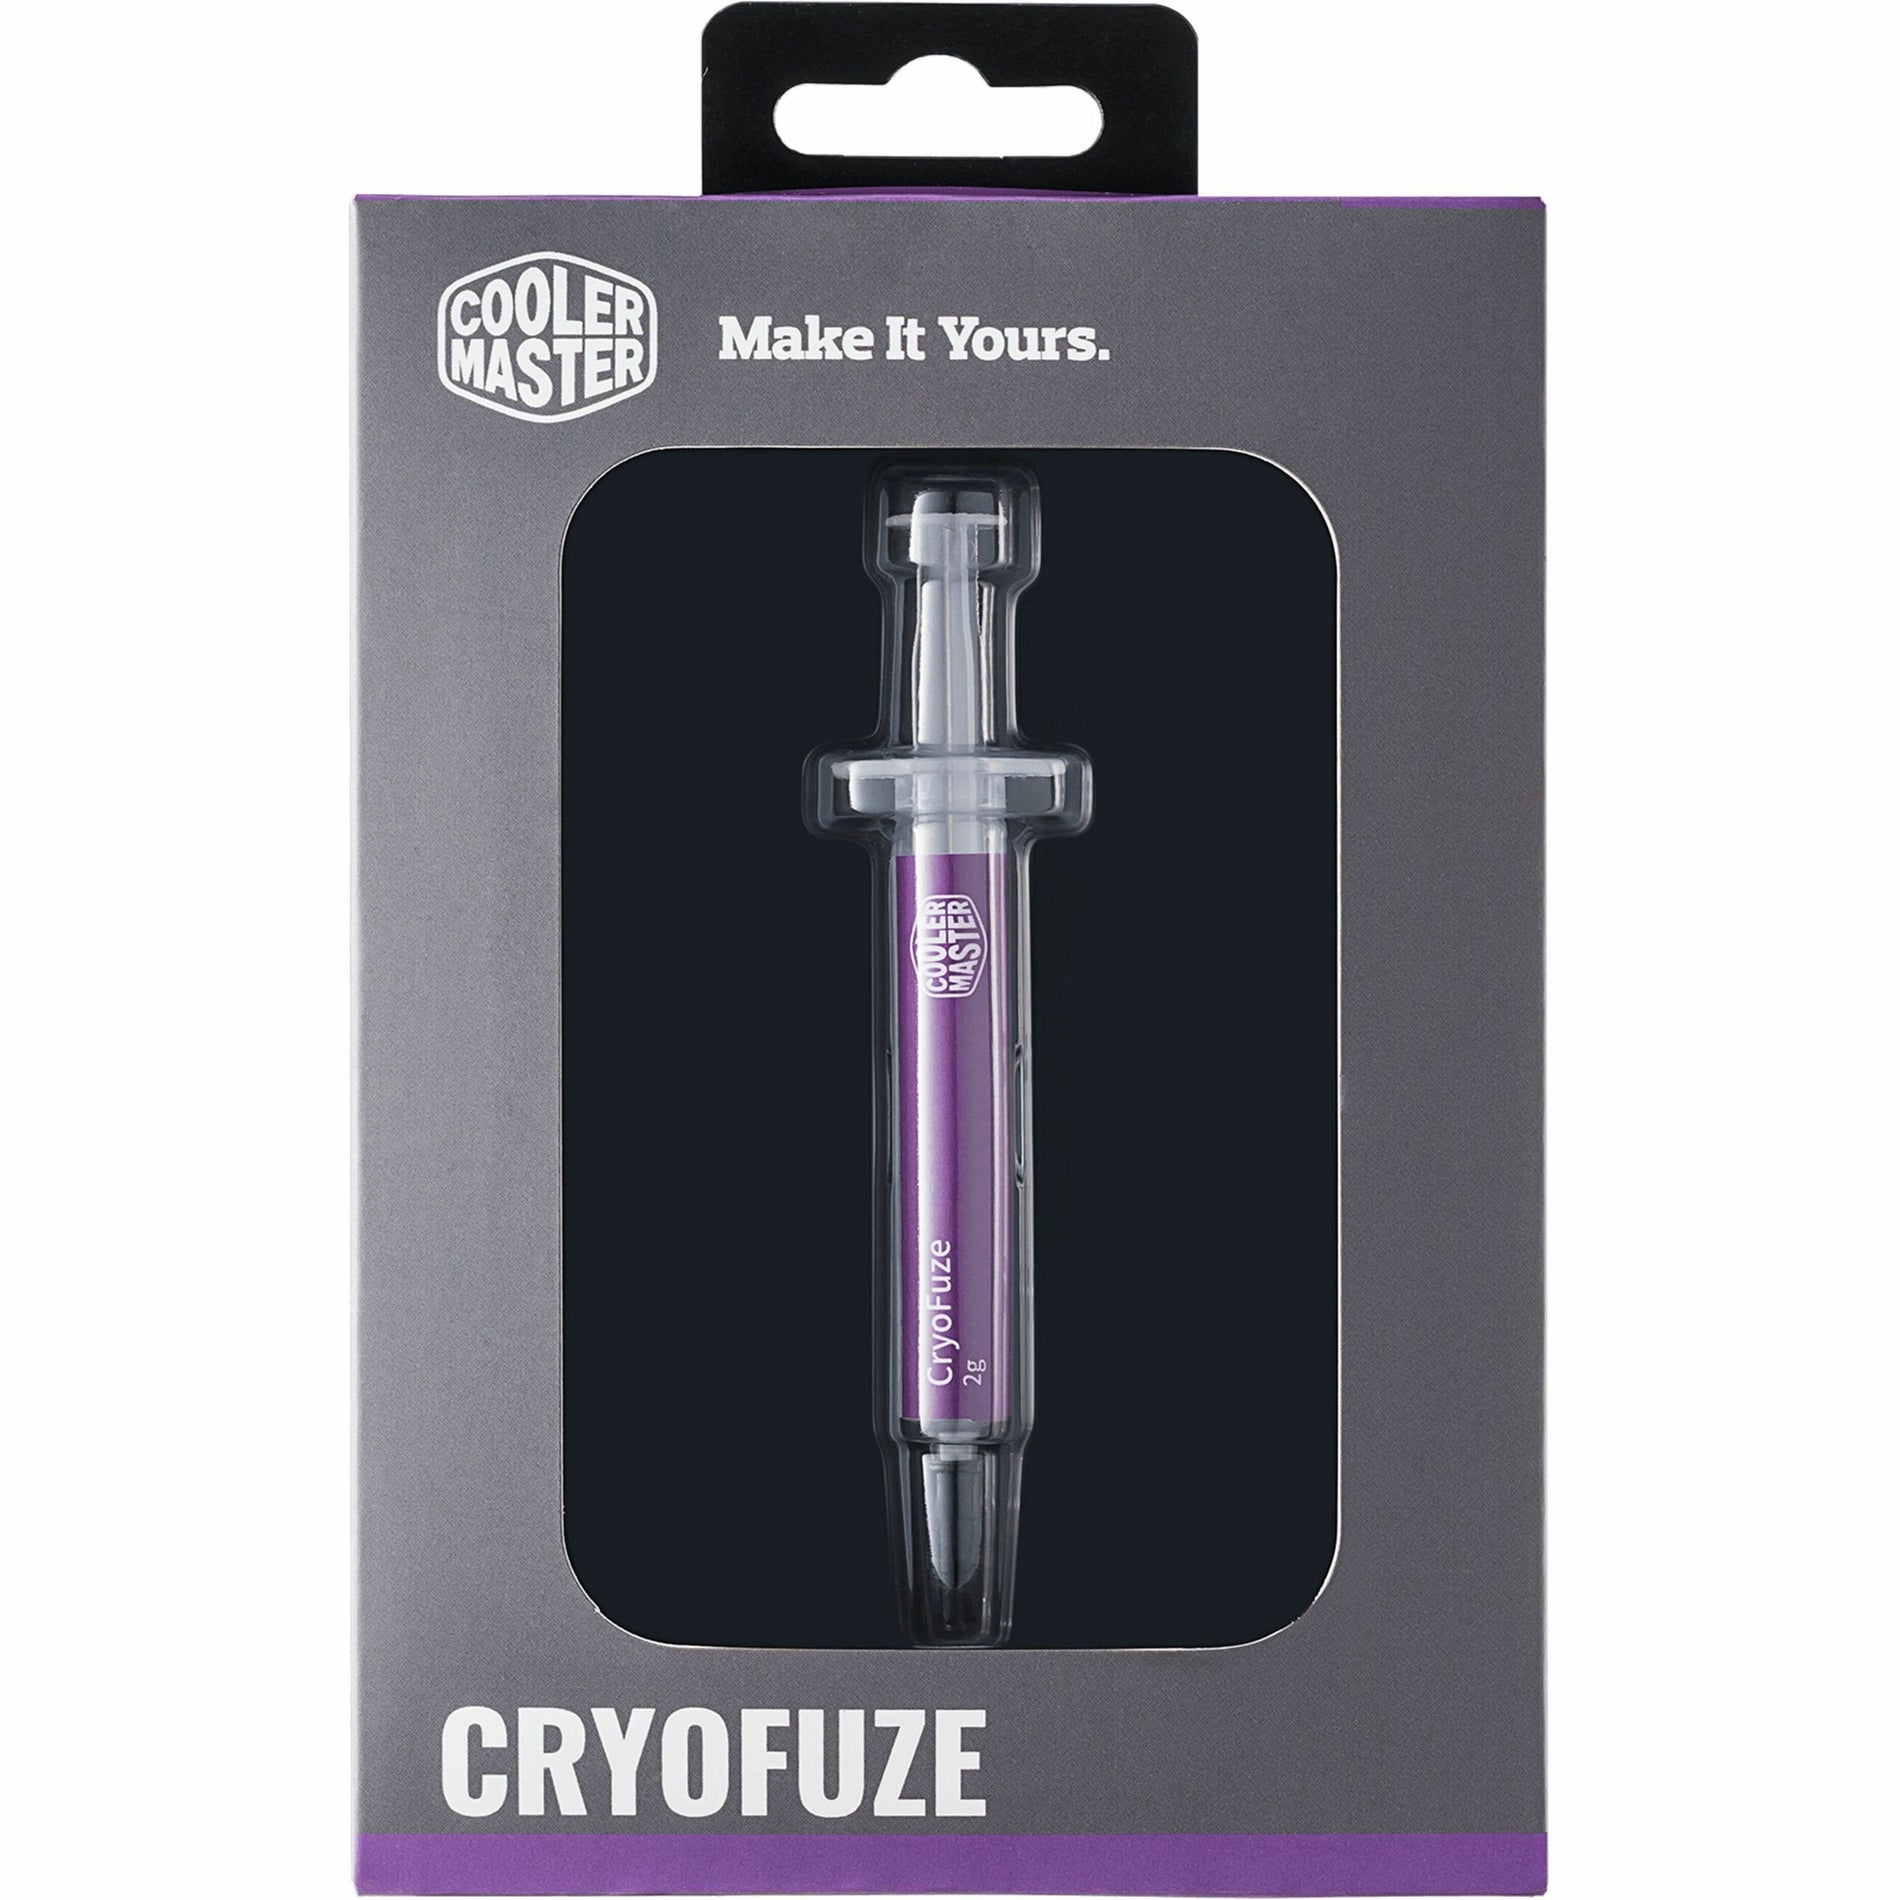 Cooler Master MGZ-NDSG-N07M-R2 Thermal Grease CryoFuze, High Performance Thermal Paste for Efficient Heat Transfer